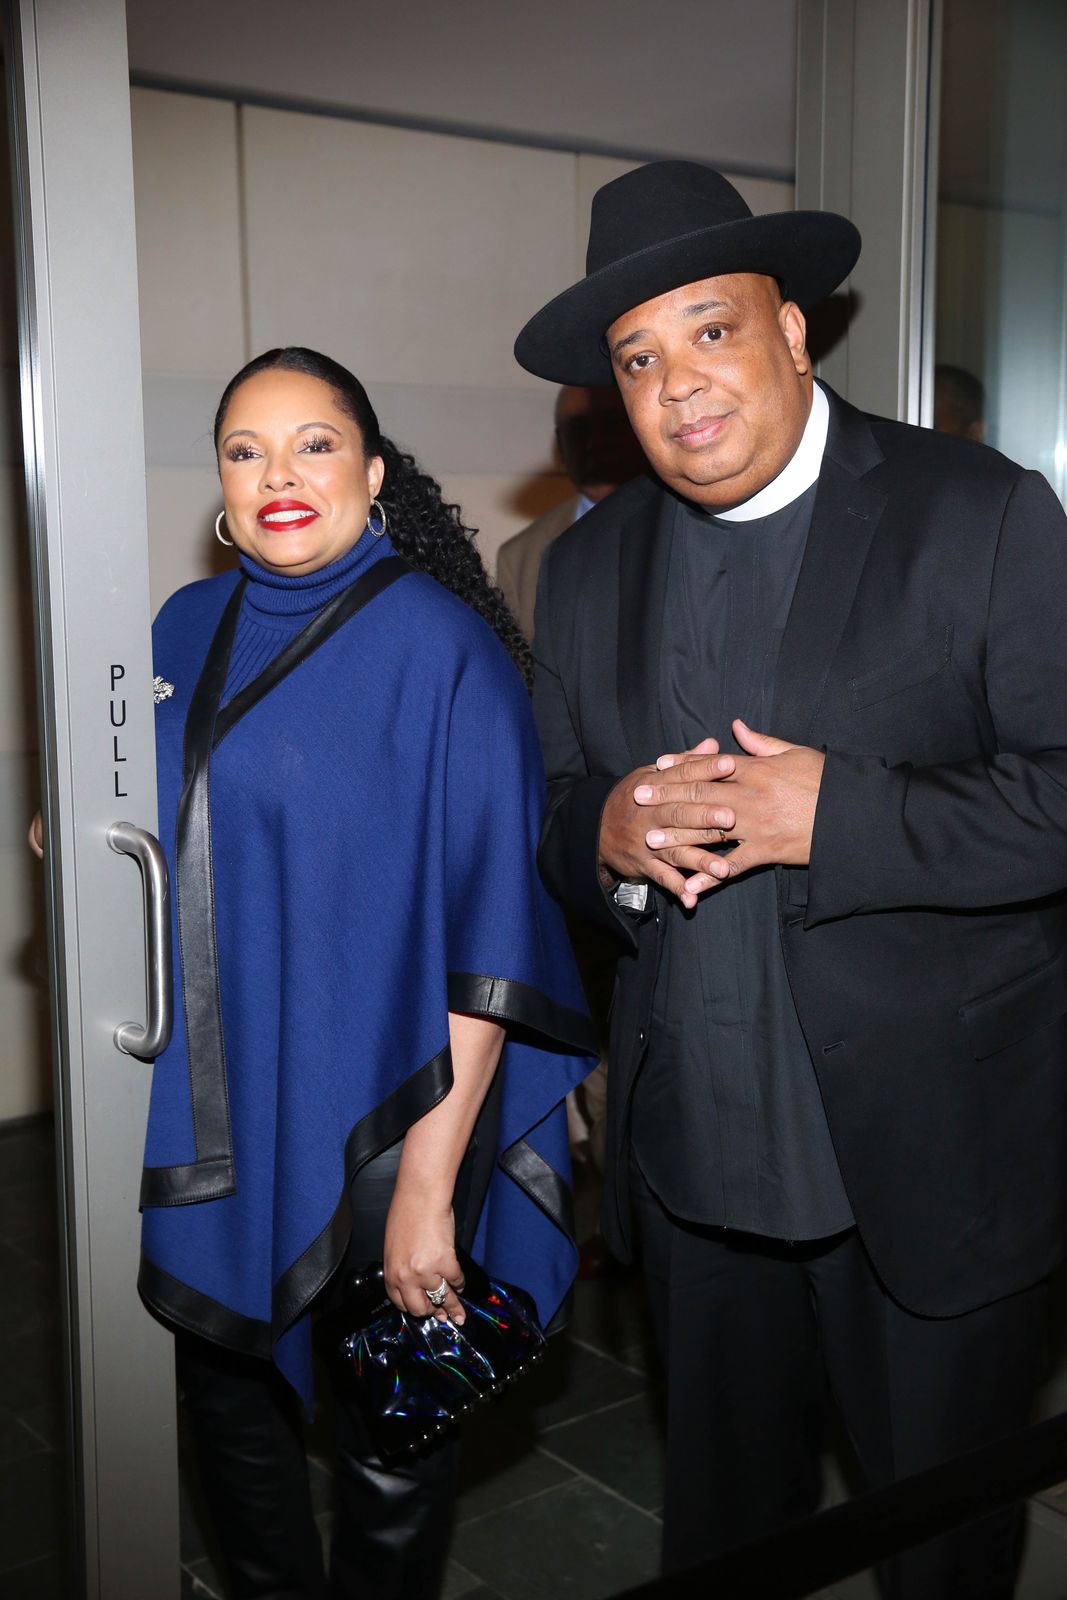 Joseph "Rev Run" and wife Justine Simmons at the 36th Annual Caucus Awards Dinner in 2018 in Los Angeles | Photo: Getty Images